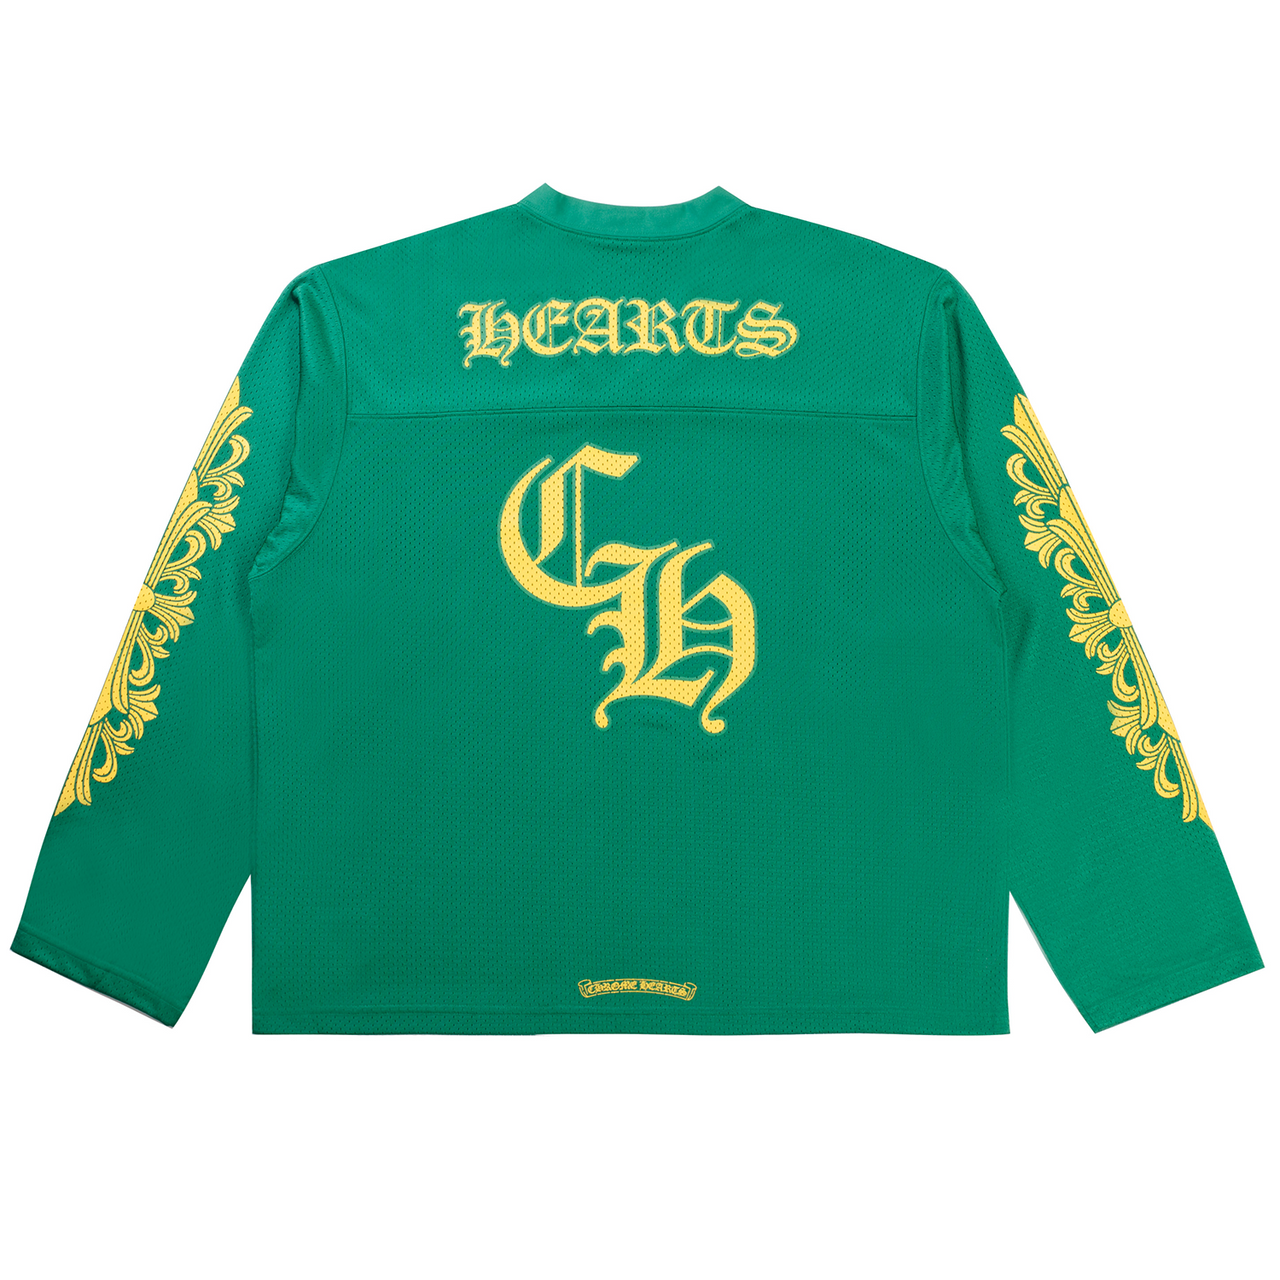 Chrome Hearts Floral Jersey Longsleeve Green Gold